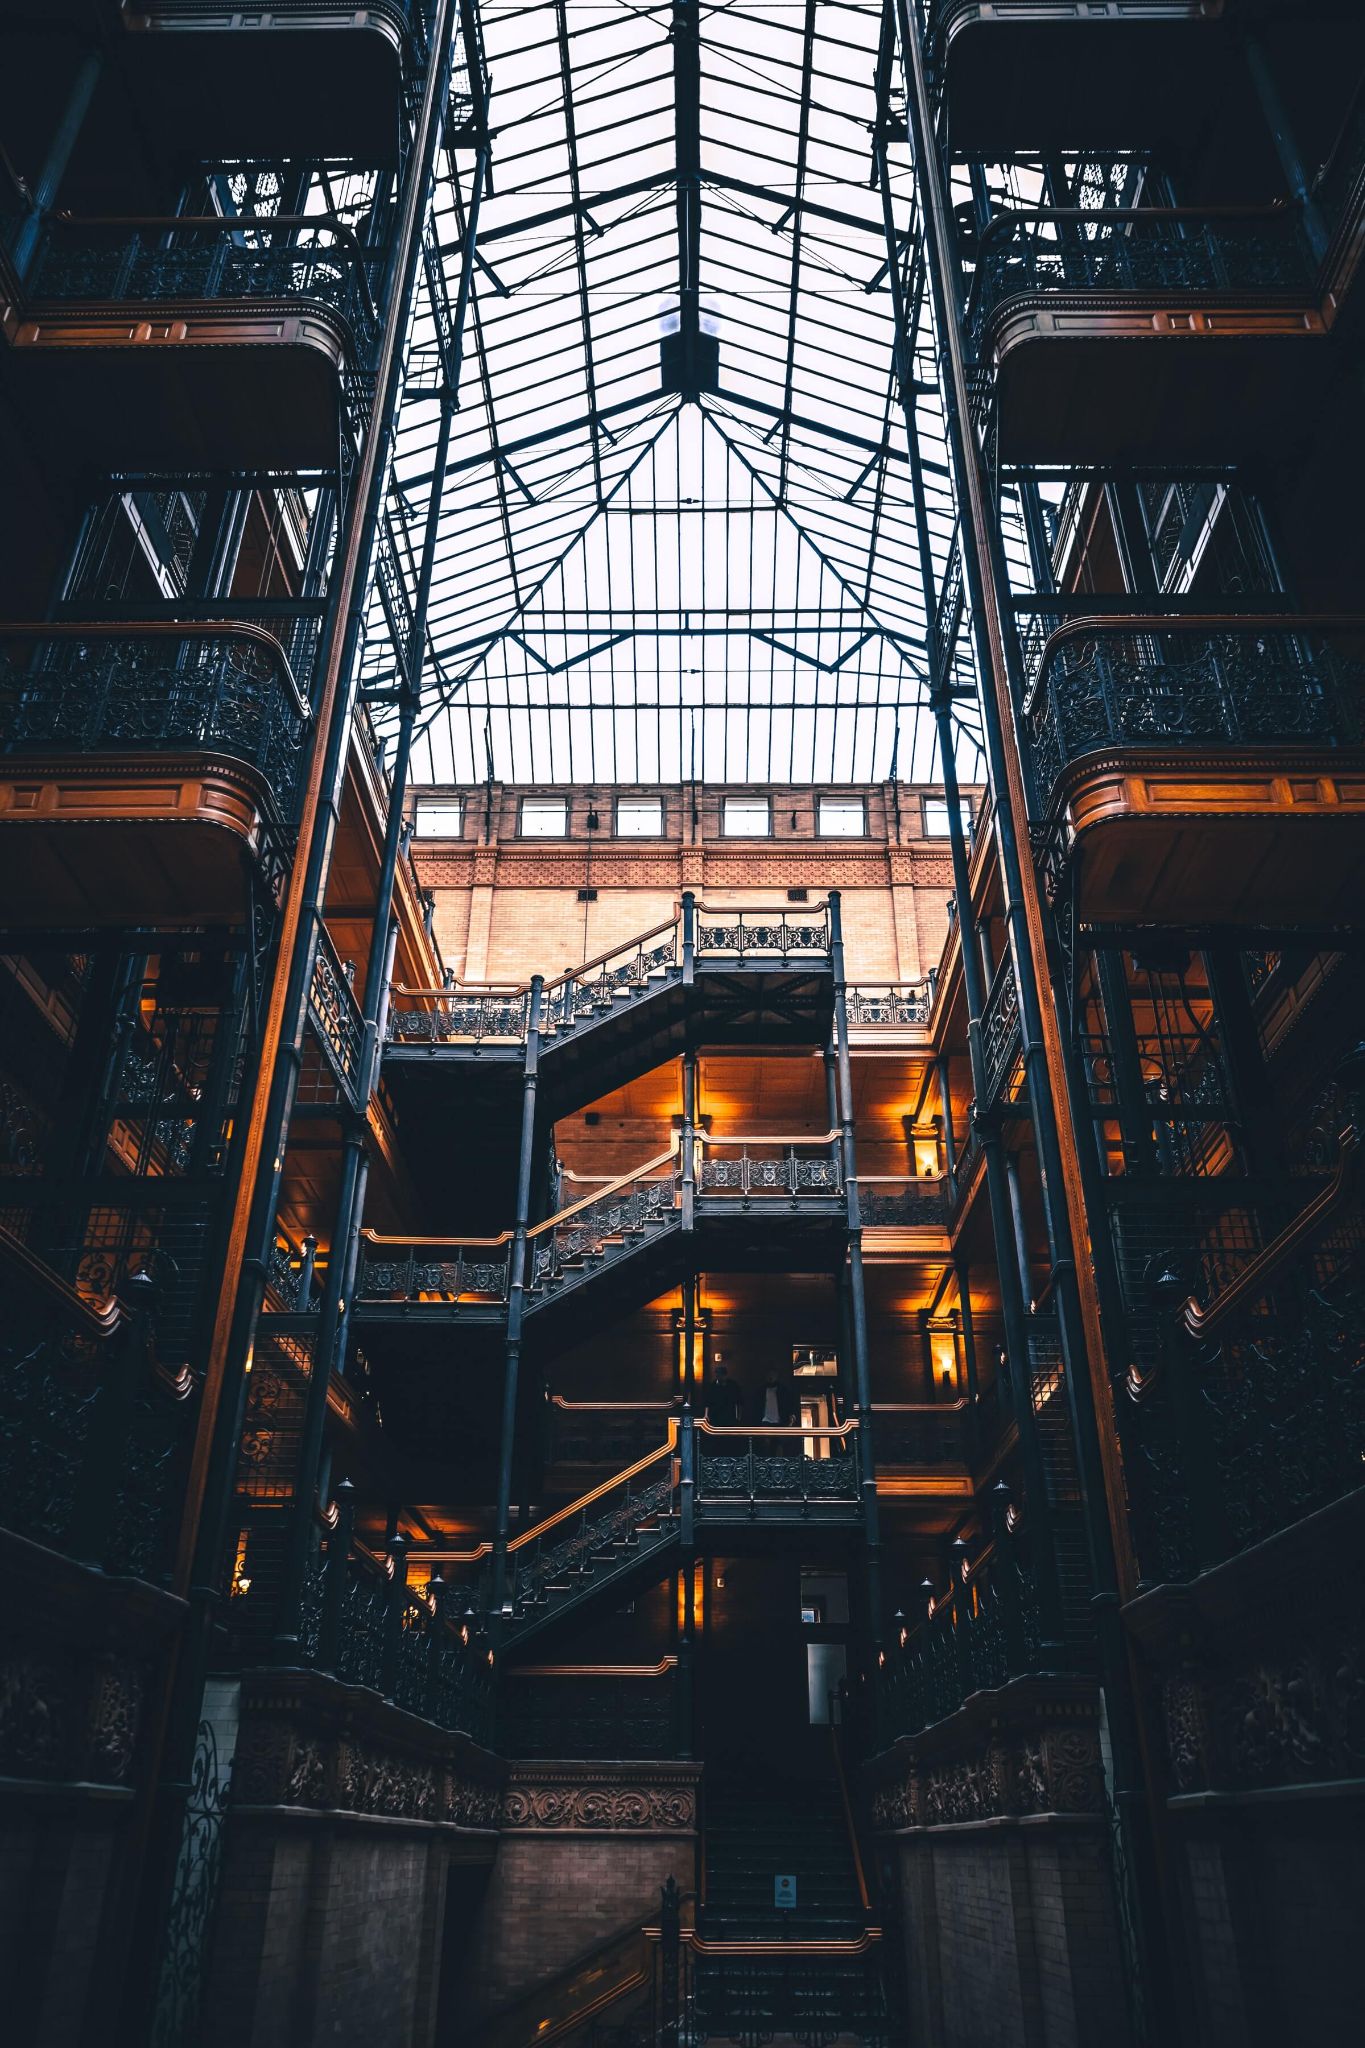 5 days in Los Angeles itinerary, Bradbury building, staircases